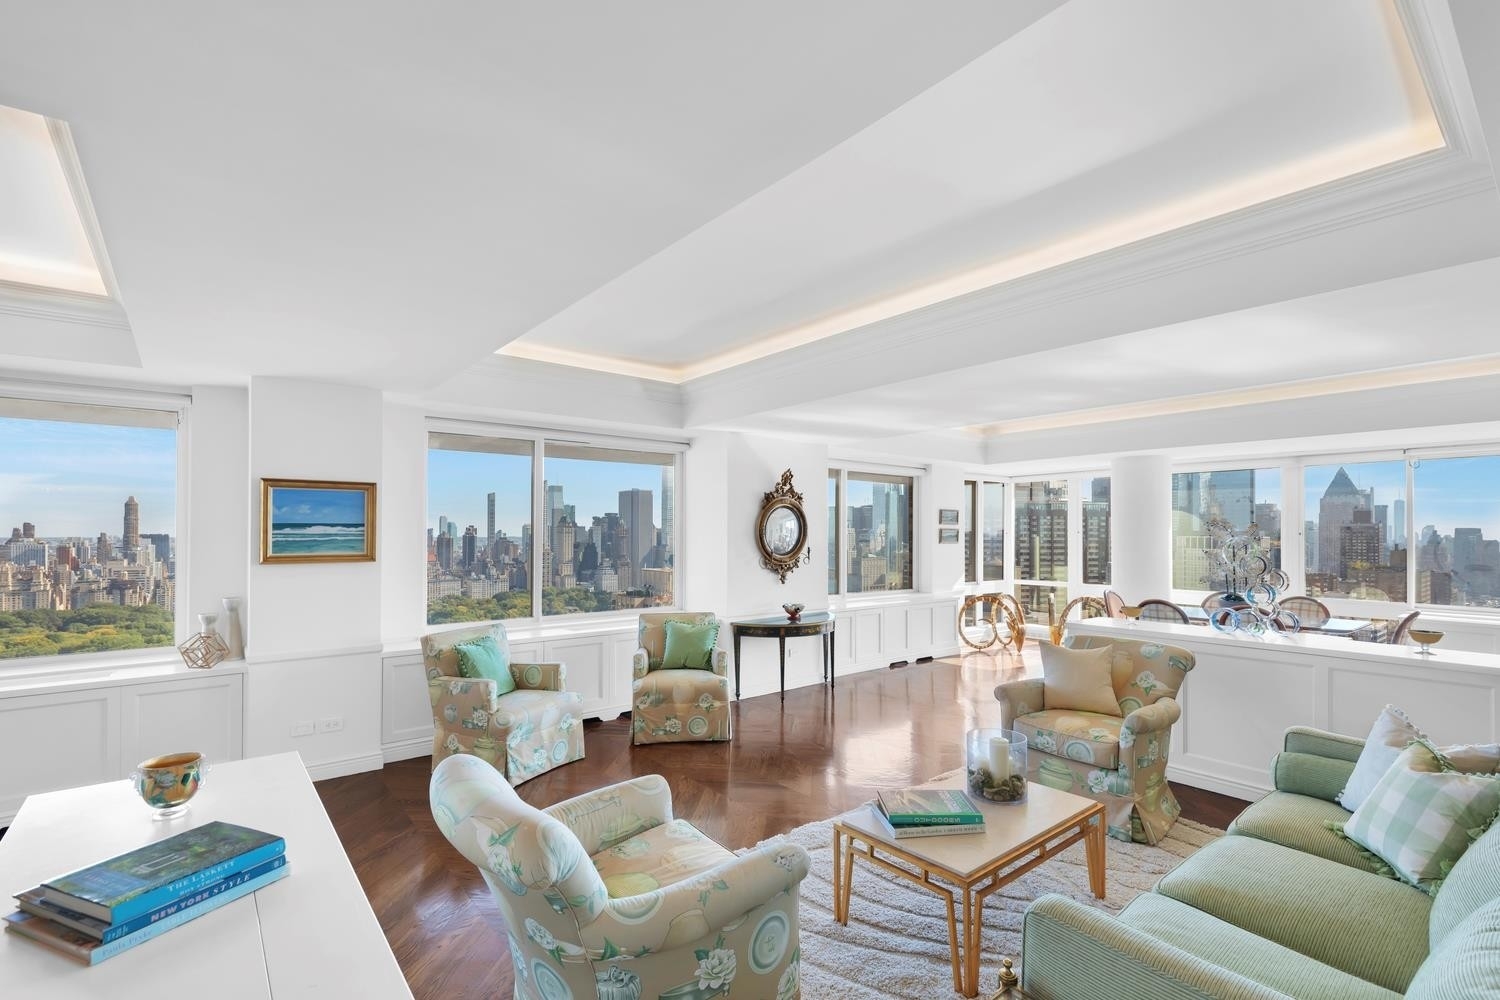 Property at The Millennium Tower, 111 W 67TH ST, 43A Lincoln Square, New York, New York 10023